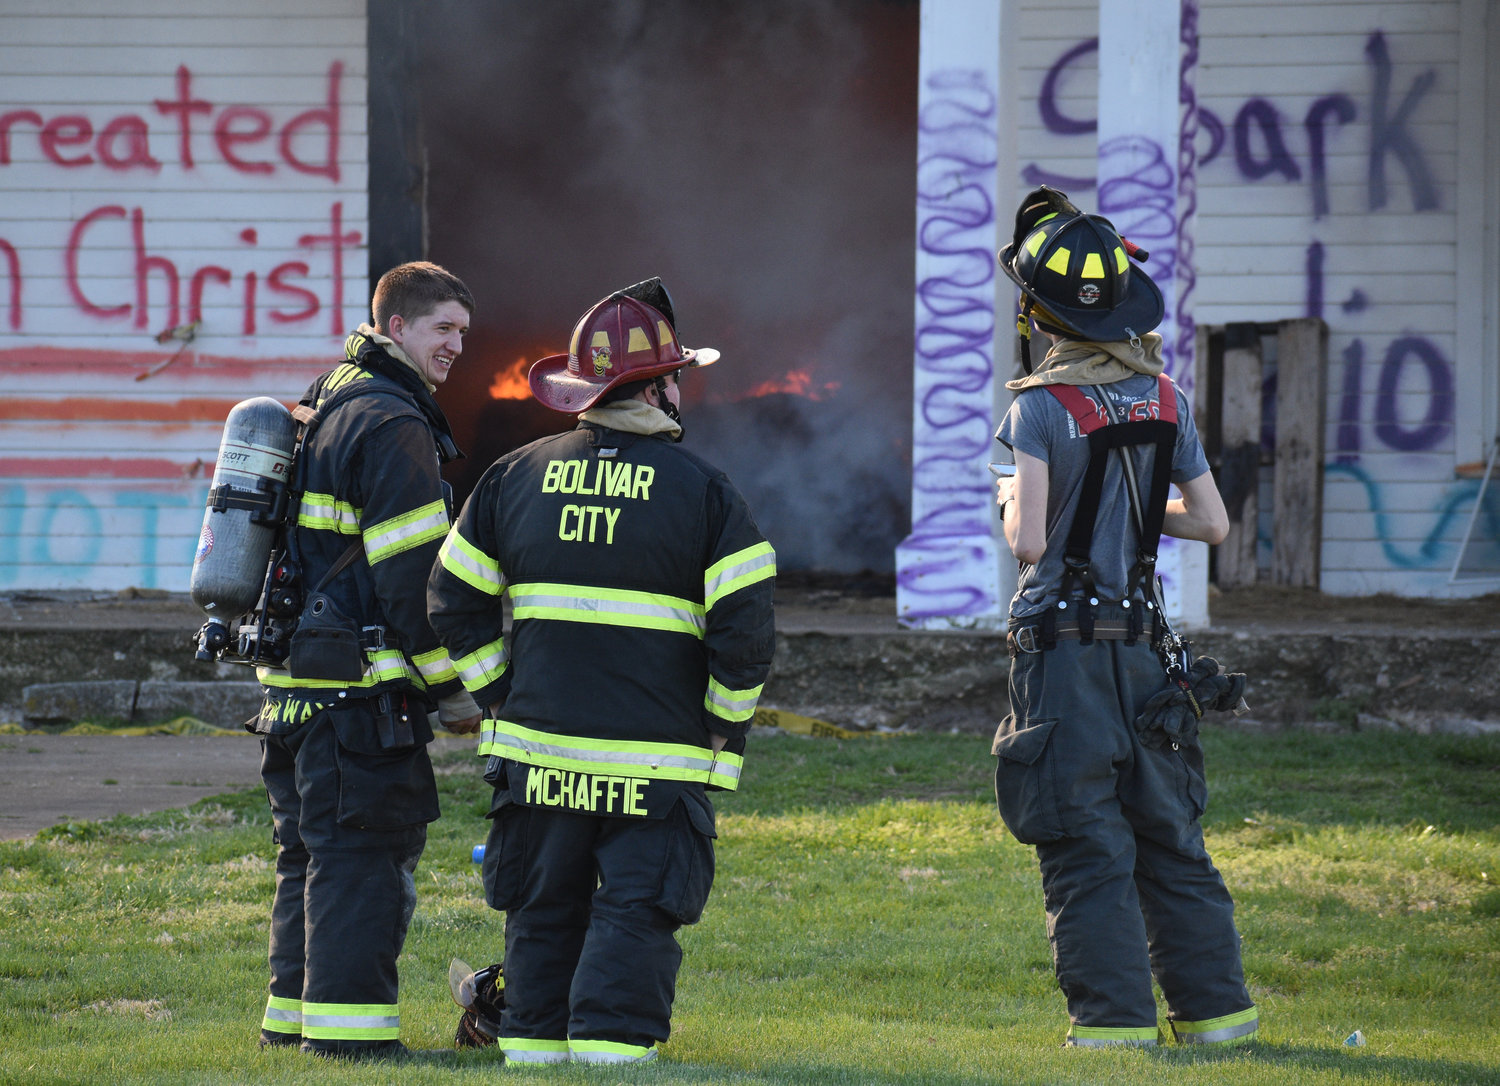 Firefighter Caleb Dunaway, Capt. Dustin McHaffie and firefighter firefighter TJ Elkins watch the fire from the house's front lawn.